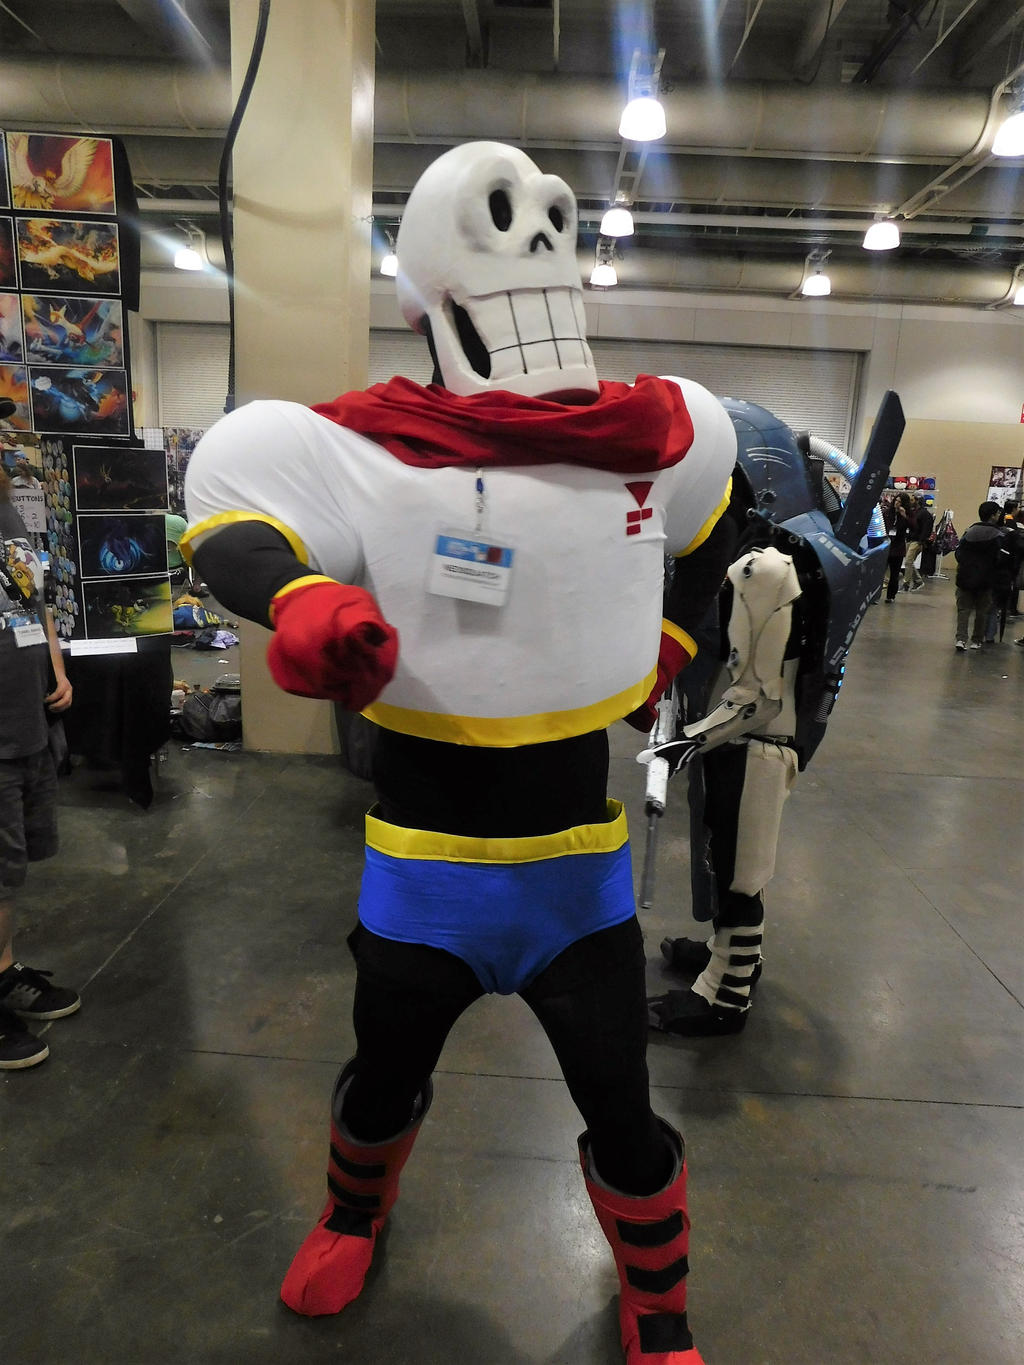 Papyrus the Great by BrinyCosplay on DeviantArt